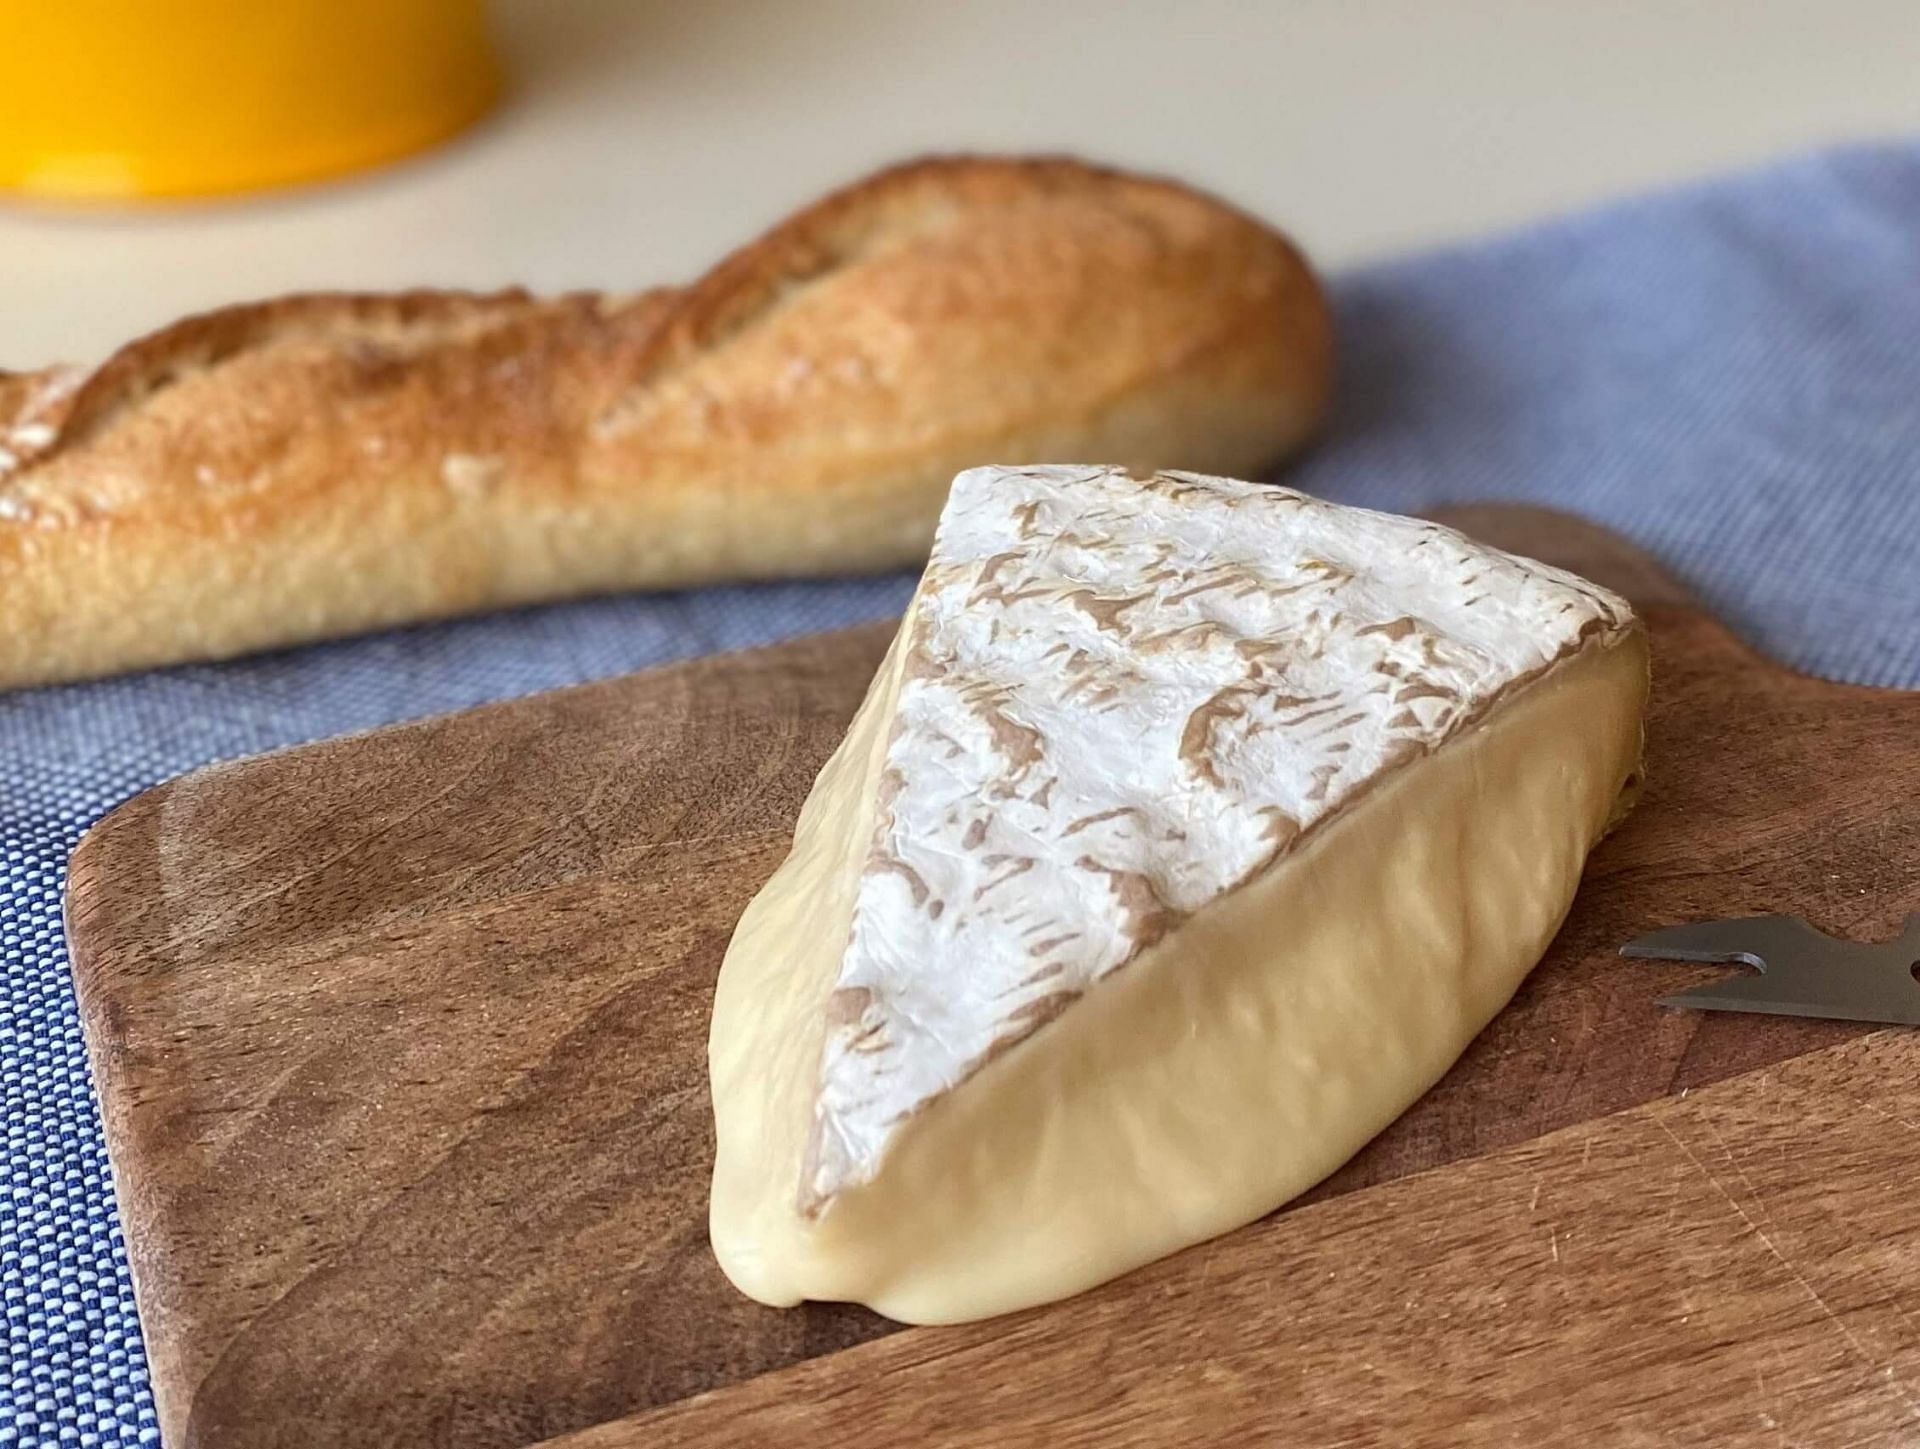 Listeria epidemic linked to specific brie and camembert cheese brands is being investigated by the CDC (photo credit: Jennifer Greco)